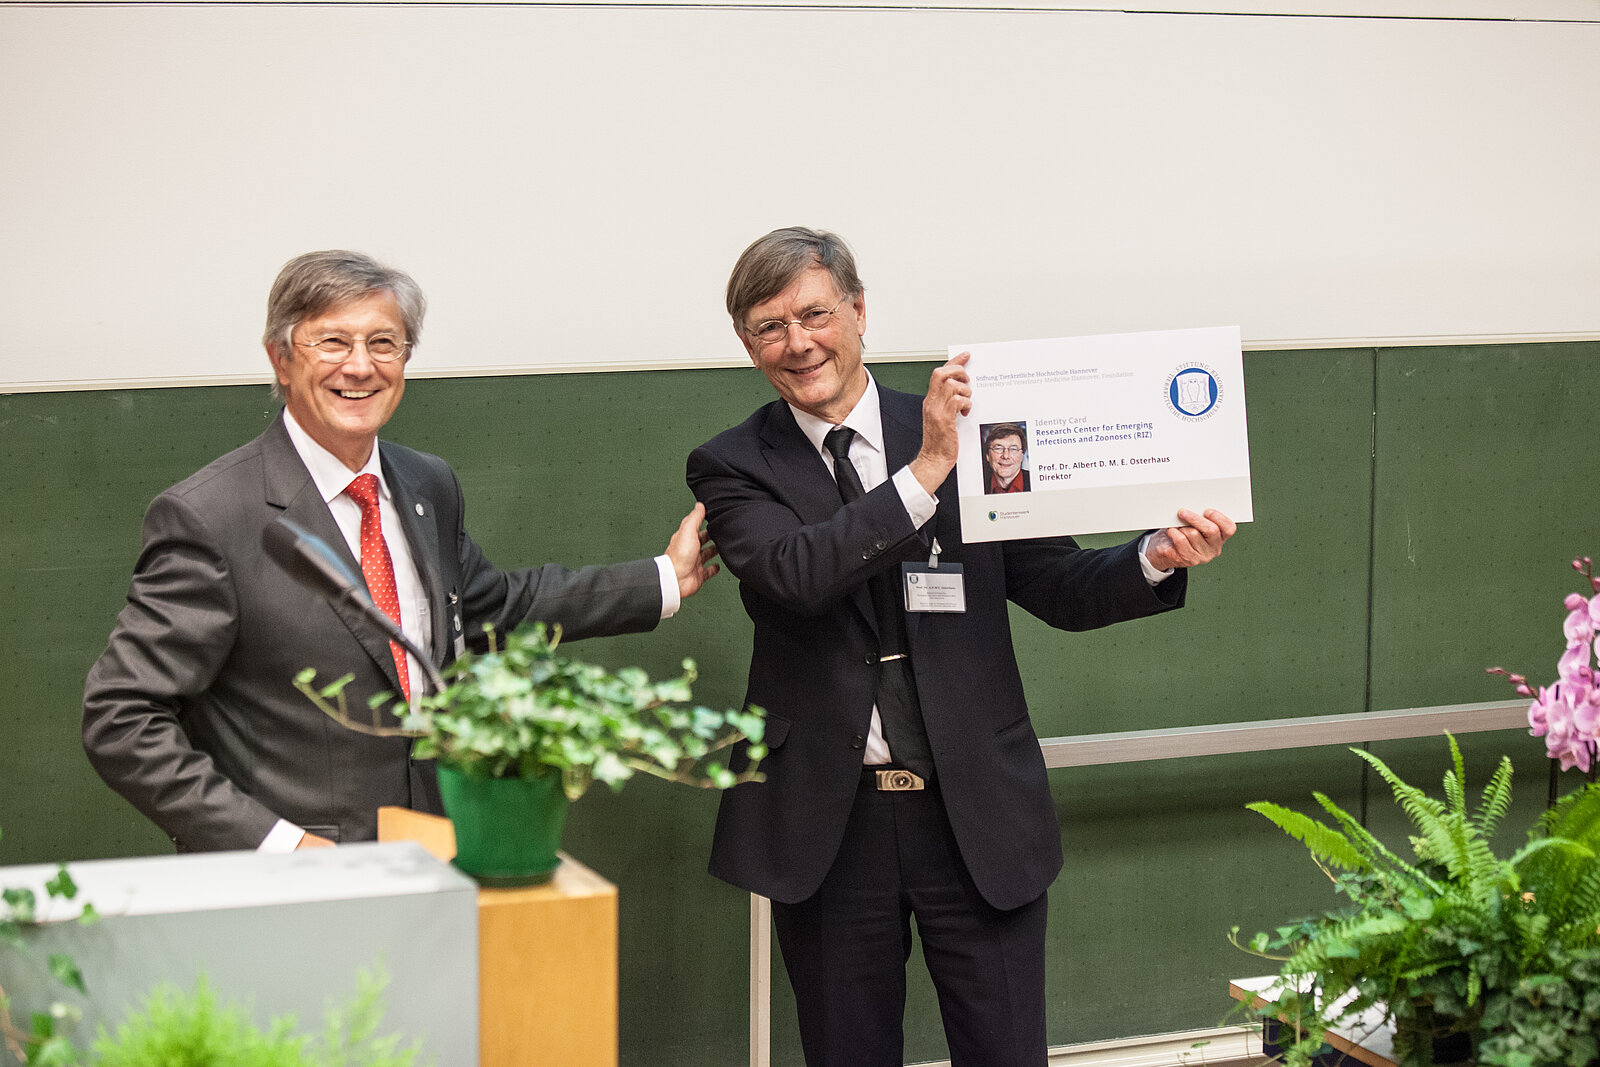 Opening in October 2014 by the founding director of the RIZ, the world's leading scientist in virology Prof. Albert Osterhaus, PhD, DVM  & TiHo president Dr. Dr. h. c. mult. Gerhard Greif